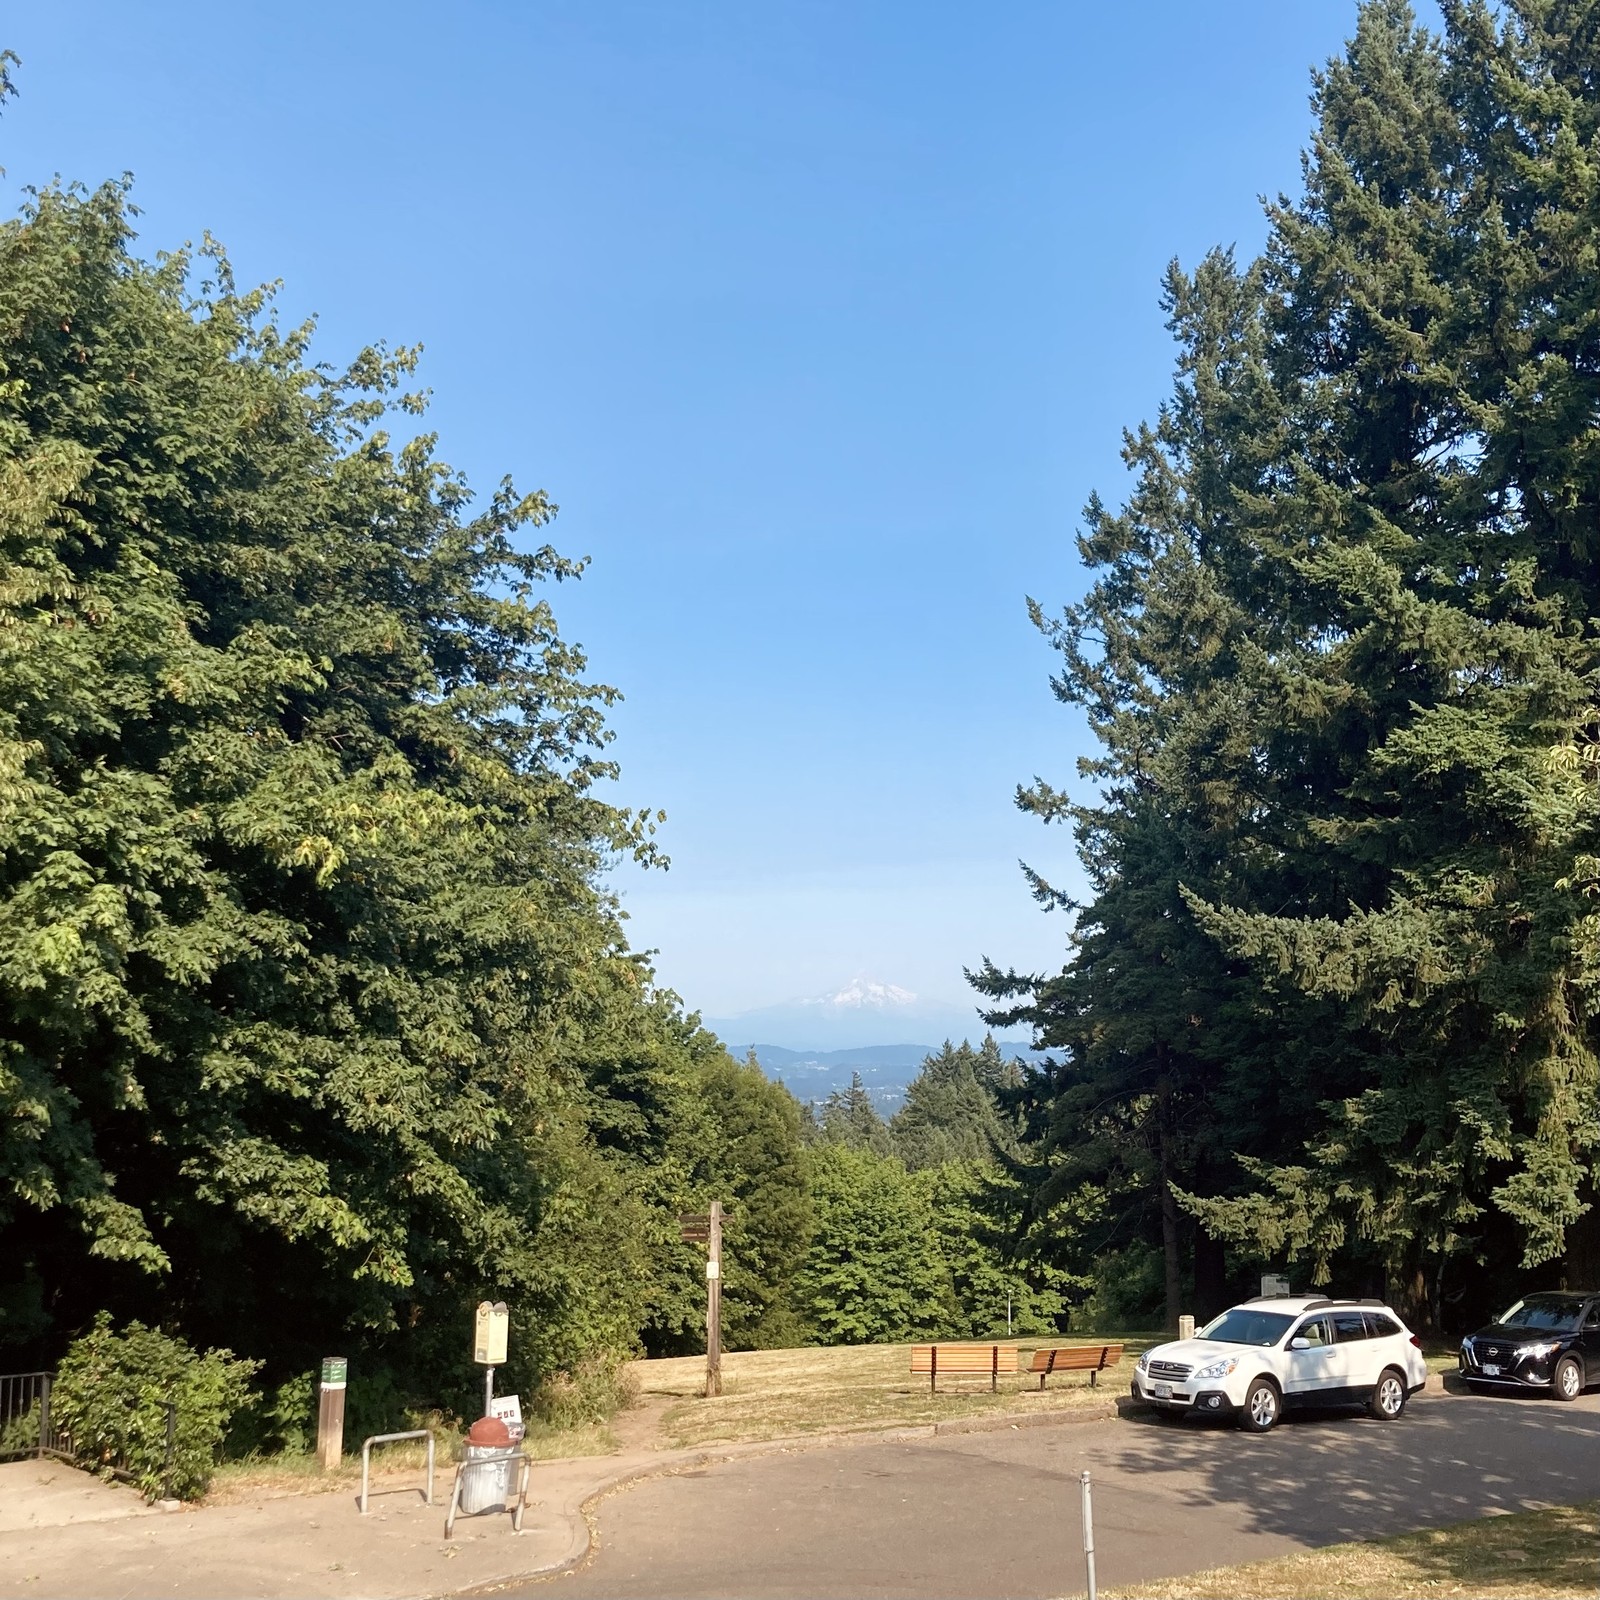 Mt. Hood seen from Council Crest Park. A moderate haze from a nearby paper mill fire obscures the otherwise clear view on a very hot & dry day